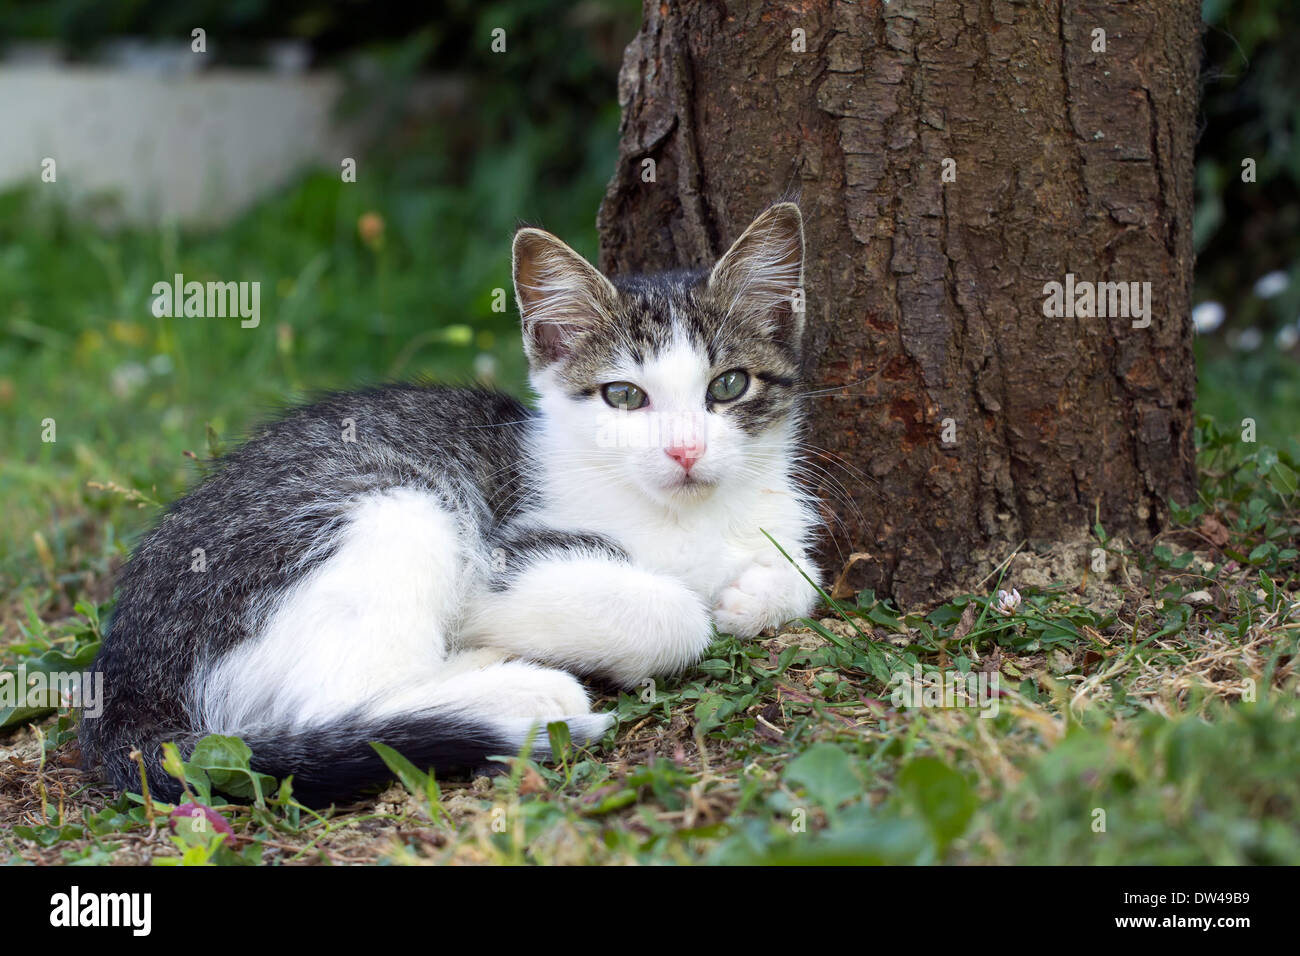 Cute, small cat lying on the grass. Stock Photo